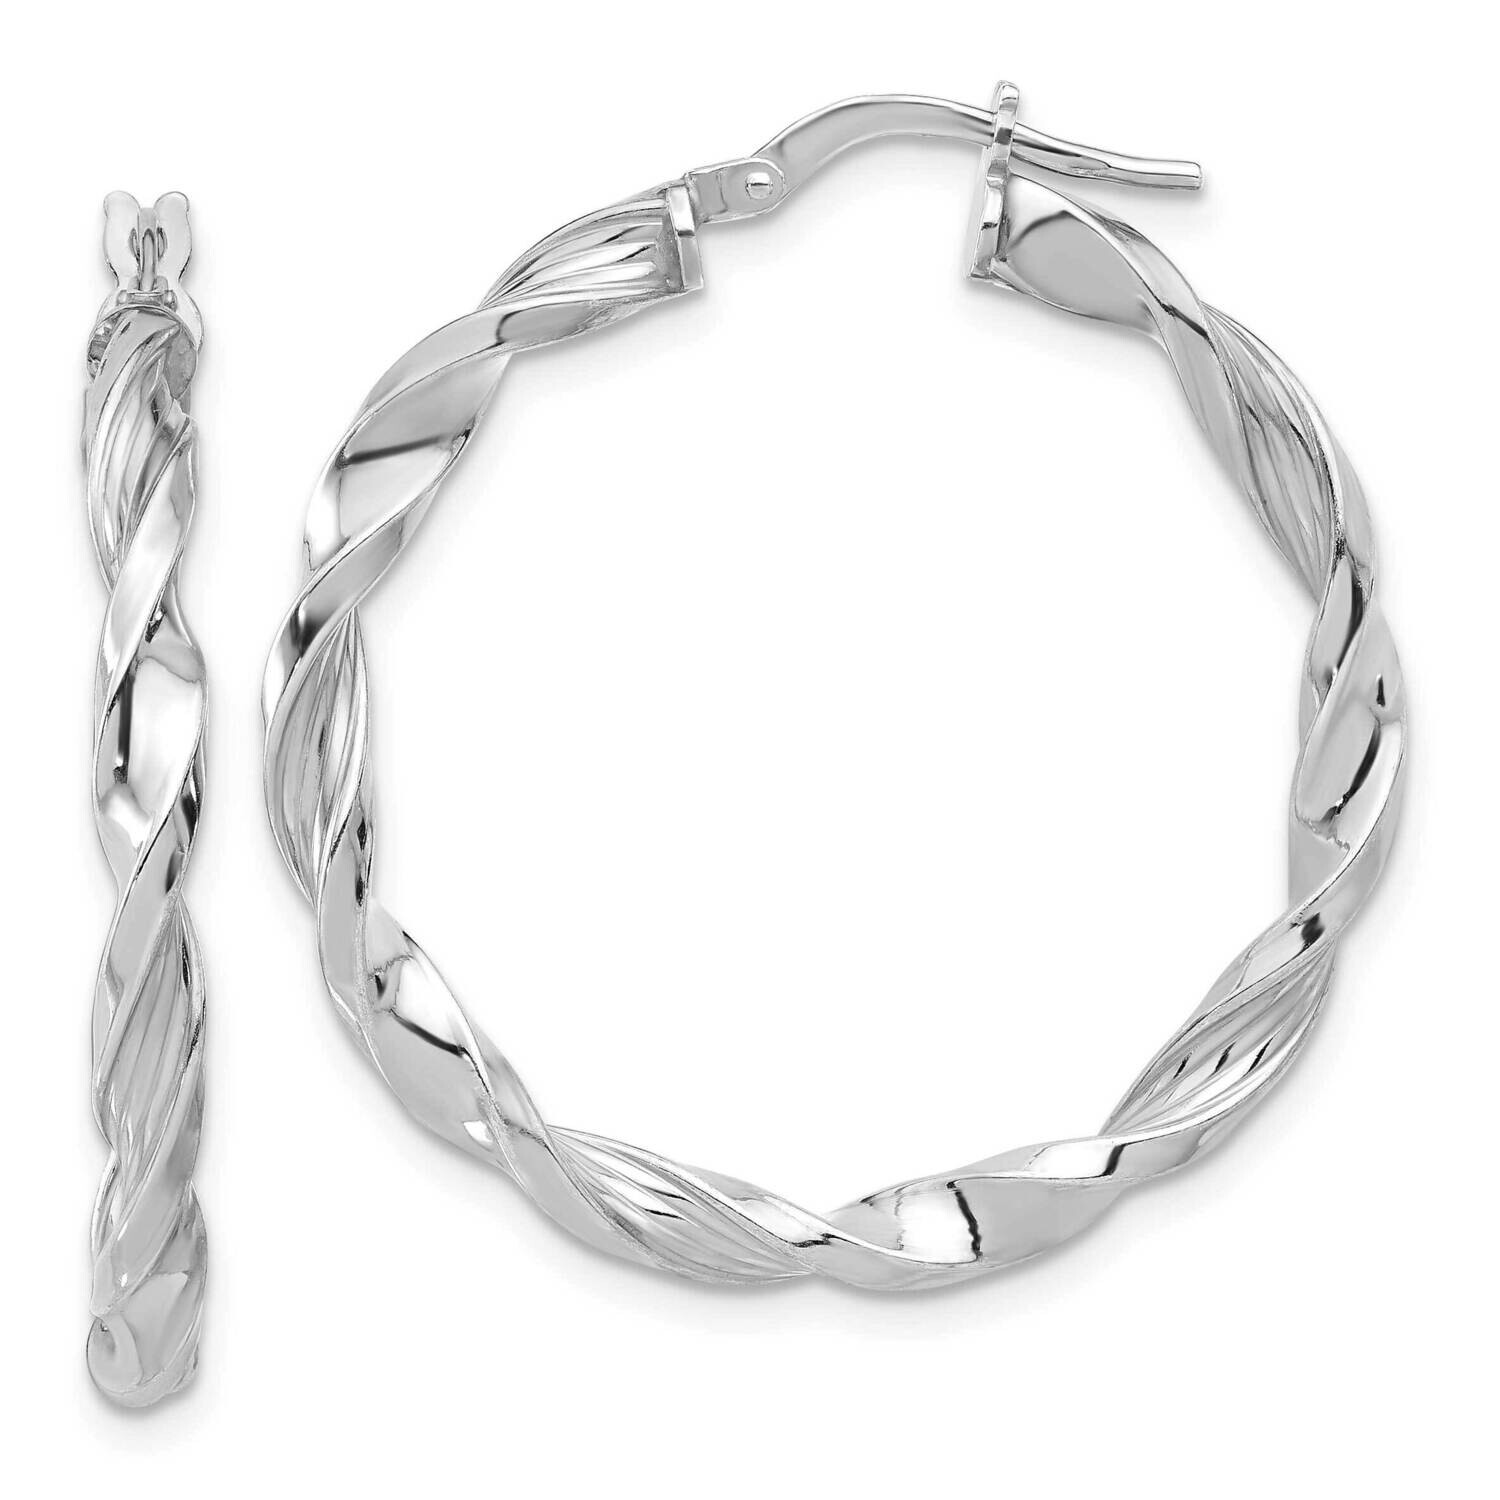 Polished & Textured Twisted Hoop Earrings Sterling Silver Rhodium-Plated QE16816